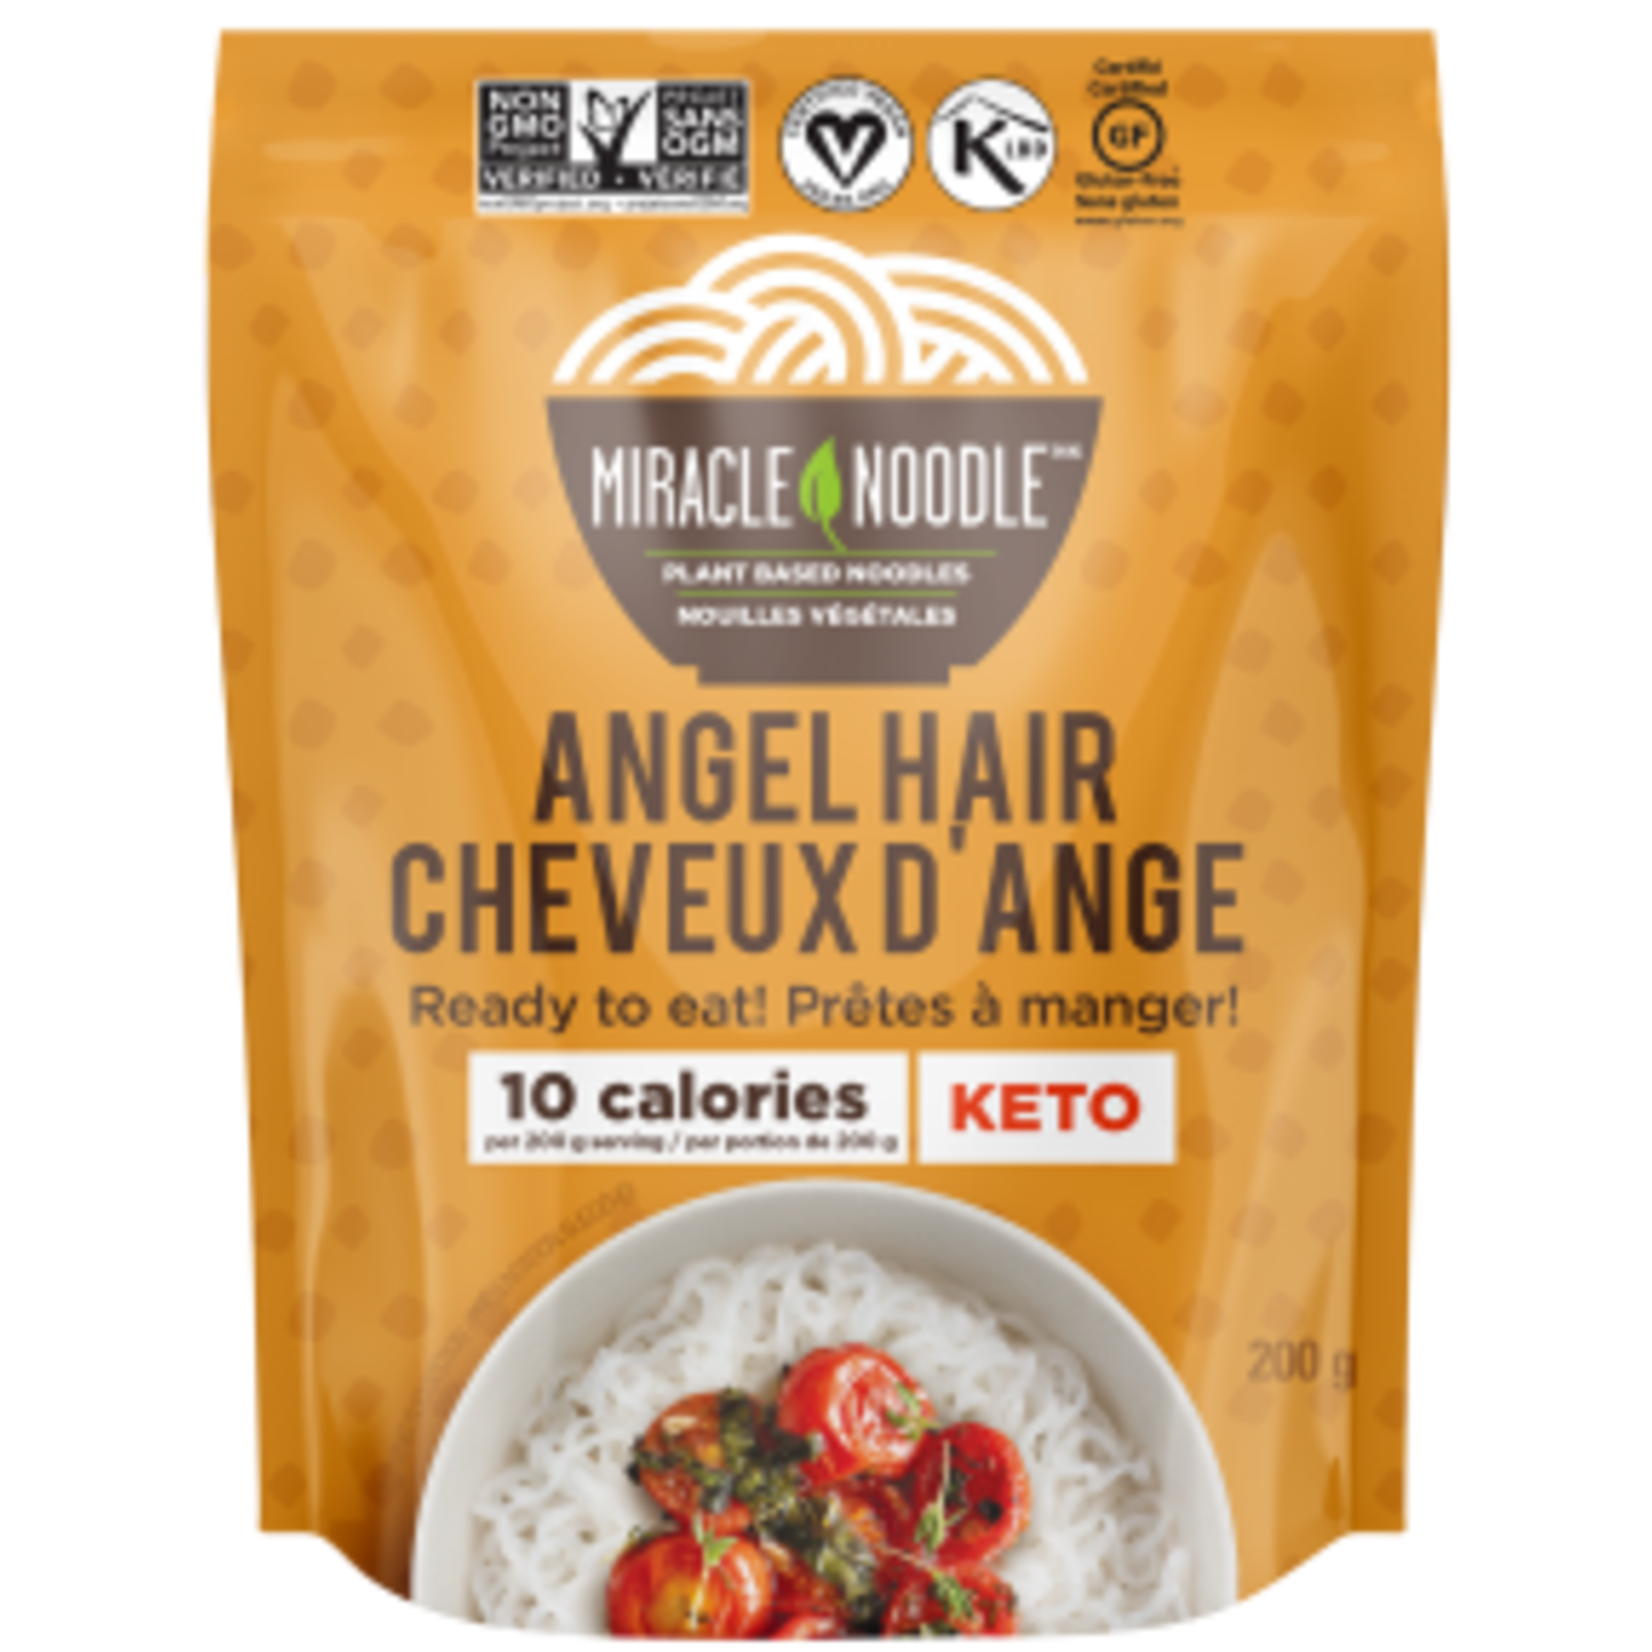 MIRACLE NOODLE MIRACLE NOODLE ANGEL HAIR 200g